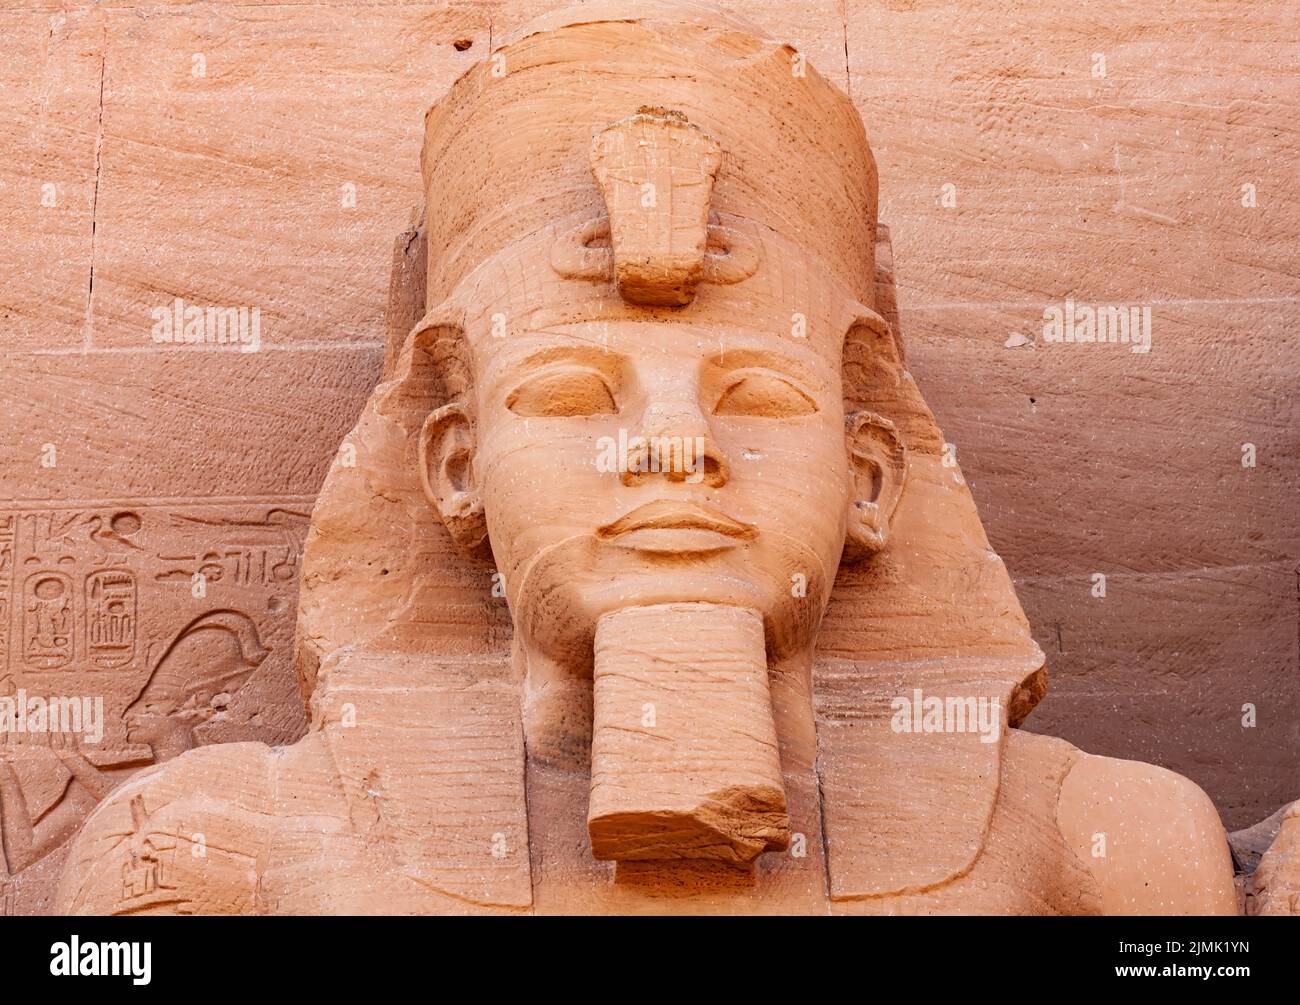 Statue of Pharaoh Ramses II in front of The Great Temple of Ramses II in the village of Abu Simbel. Stock Photo